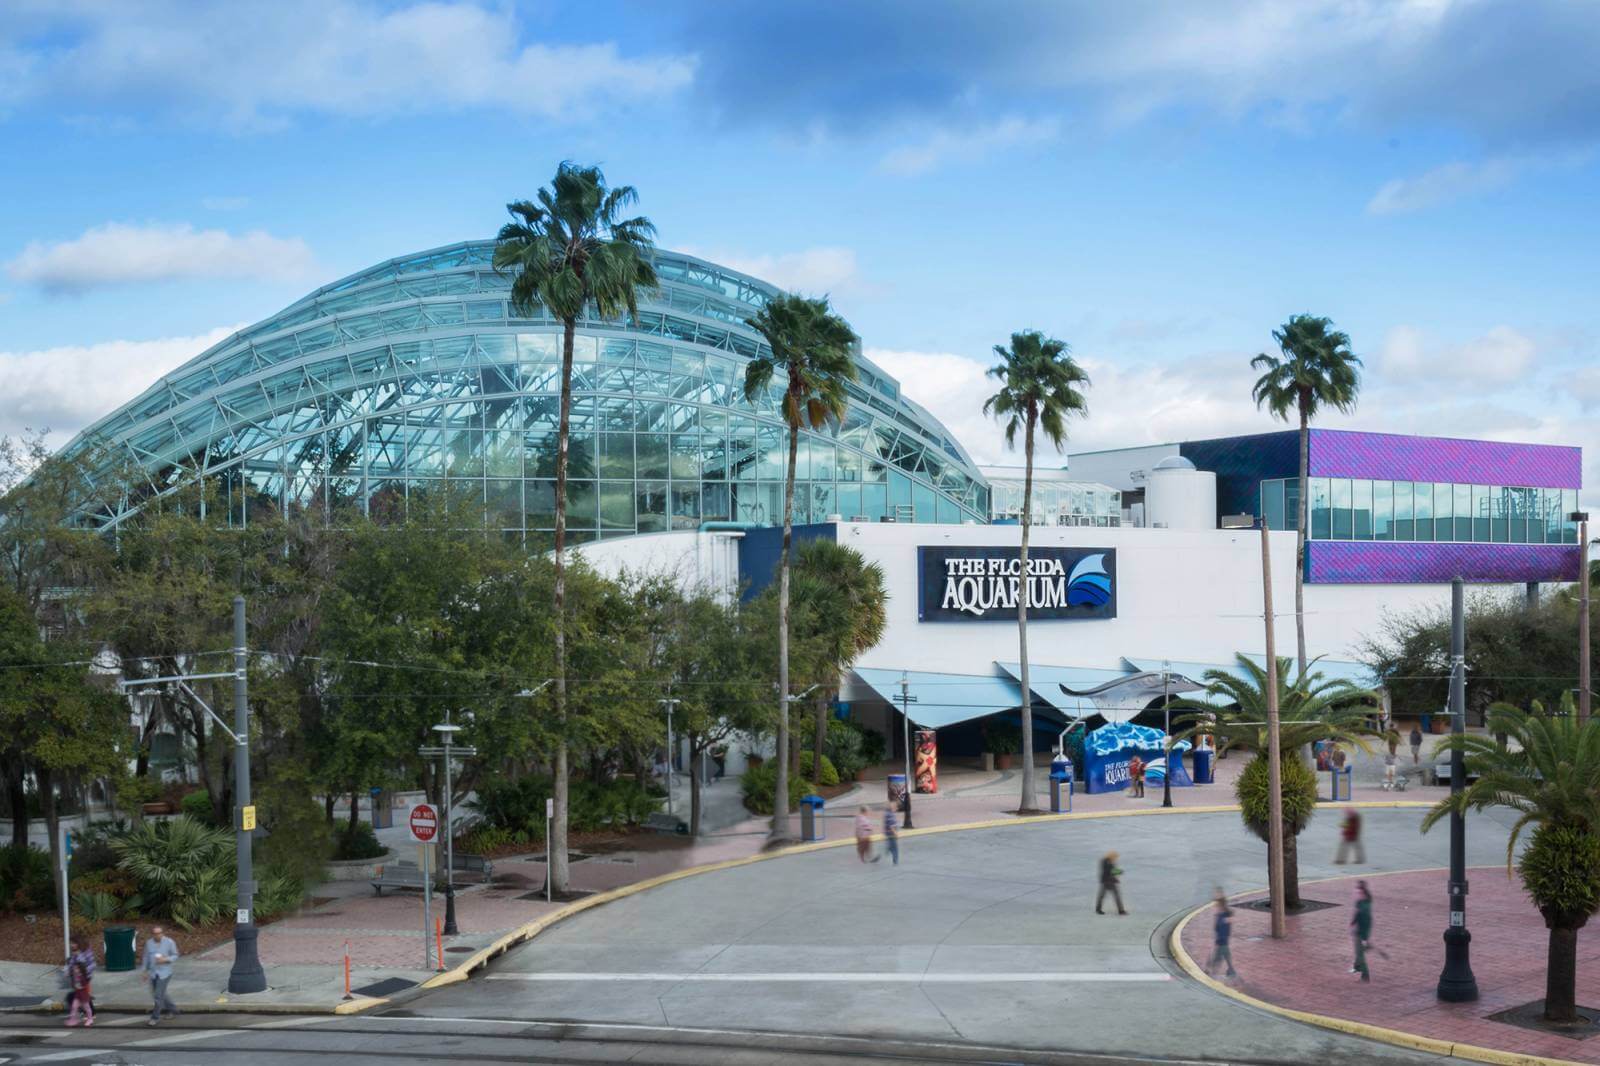 The Florida Aquarium is only about an hour away from Sarasota, located in Tampa’s Channelside area. It makes for an ideal Sarasota day trip. Photo credit The Florida Aquarium.